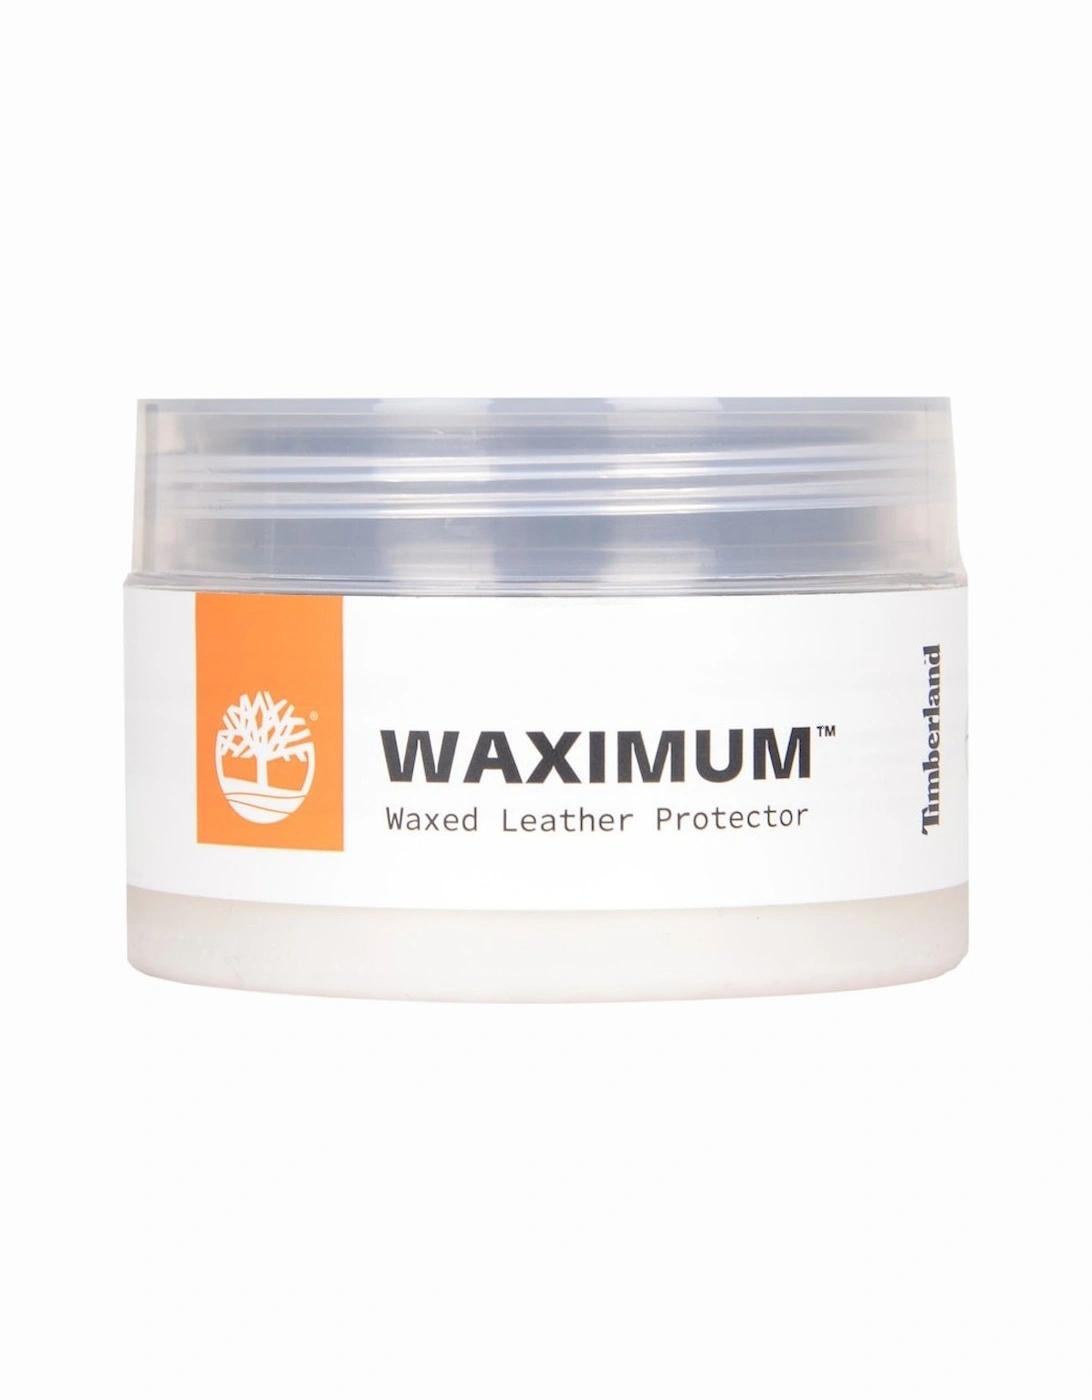 New Waximum Protection